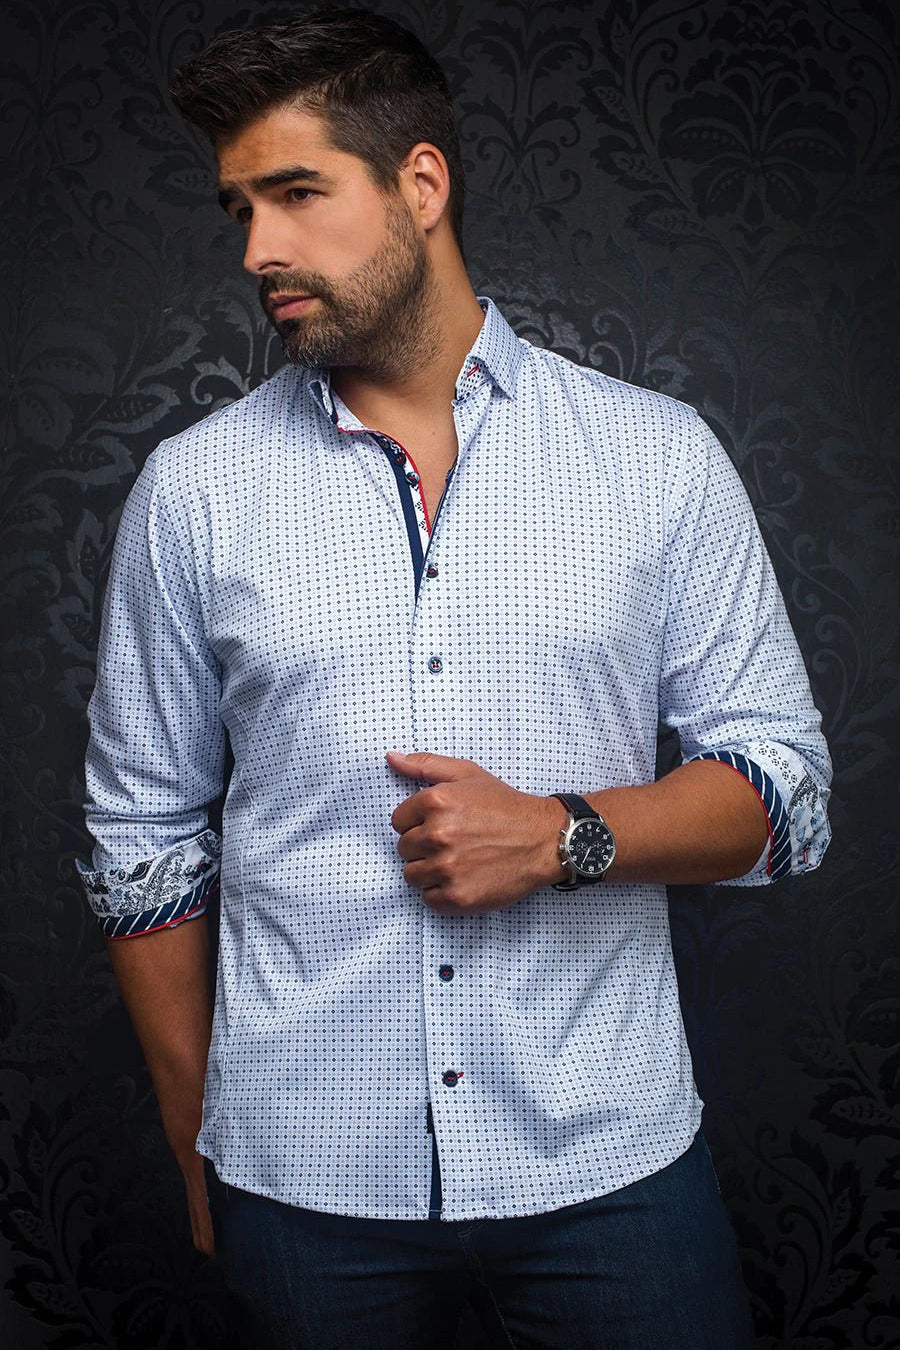 Men's casual dress shirt. Stand out with contrasting patterns and sophisticated details. Comfortable with high-end stretch cotton fabric.